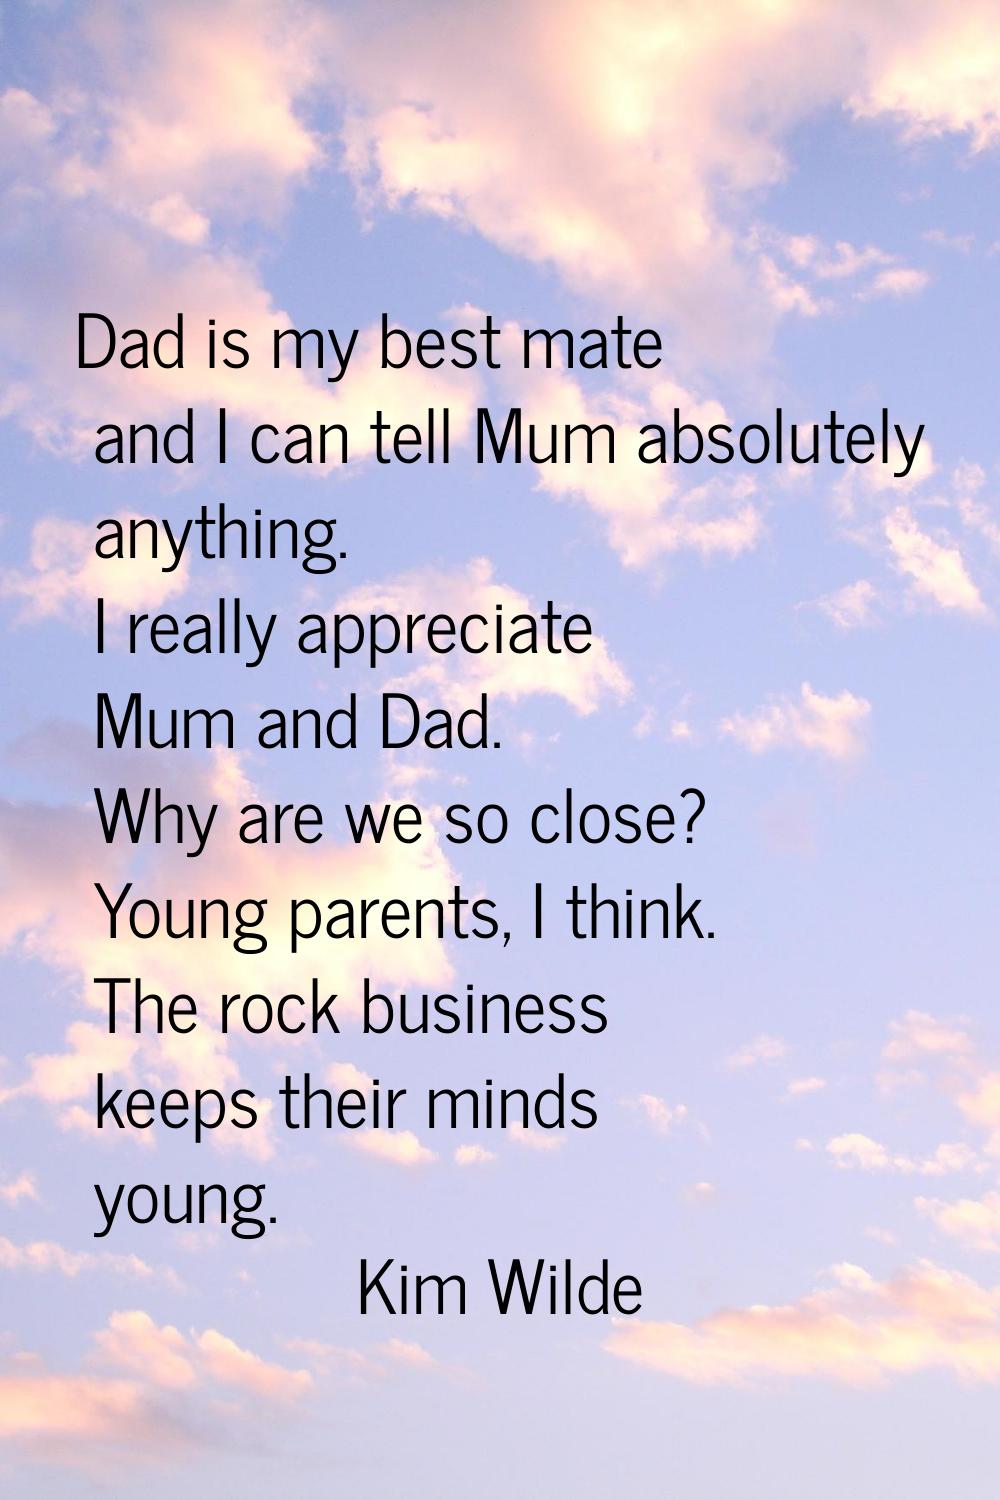 Dad is my best mate and I can tell Mum absolutely anything. I really appreciate Mum and Dad. Why ar